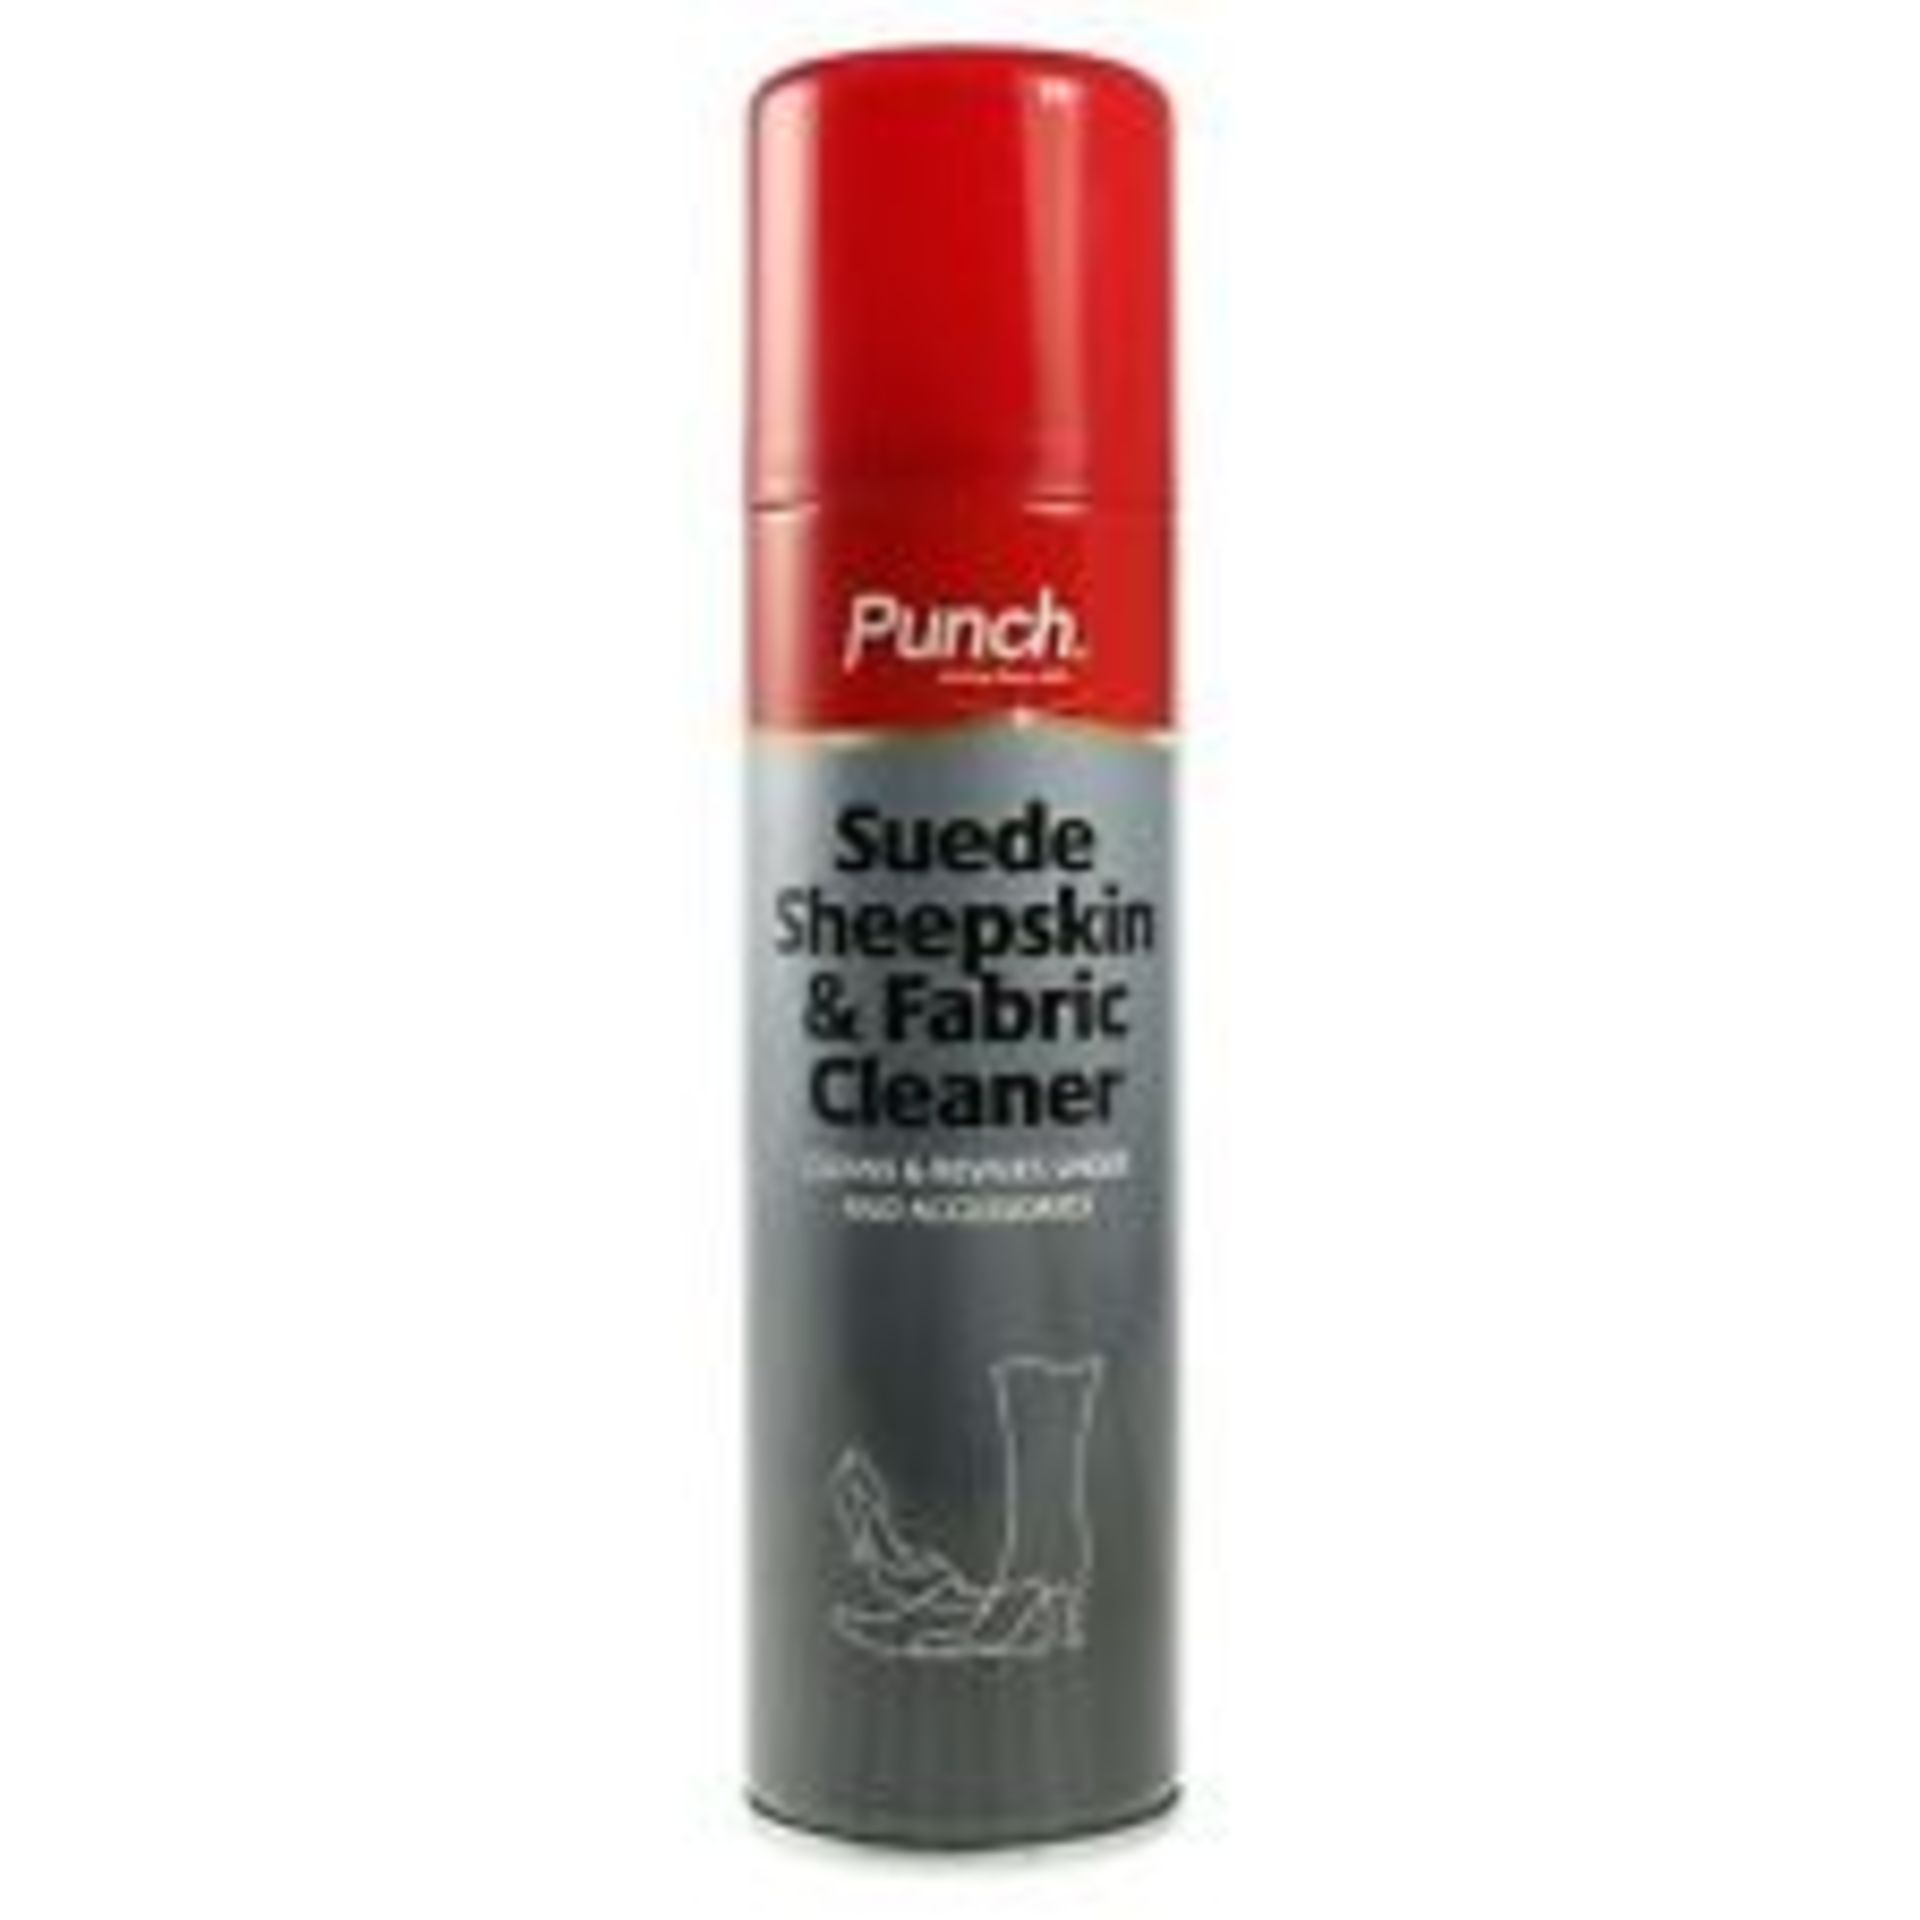 V *TRADE QTY* Brand New Six 200ml Cans Punch Suede & Fabric Shampoo (Photo May Vary From Product)